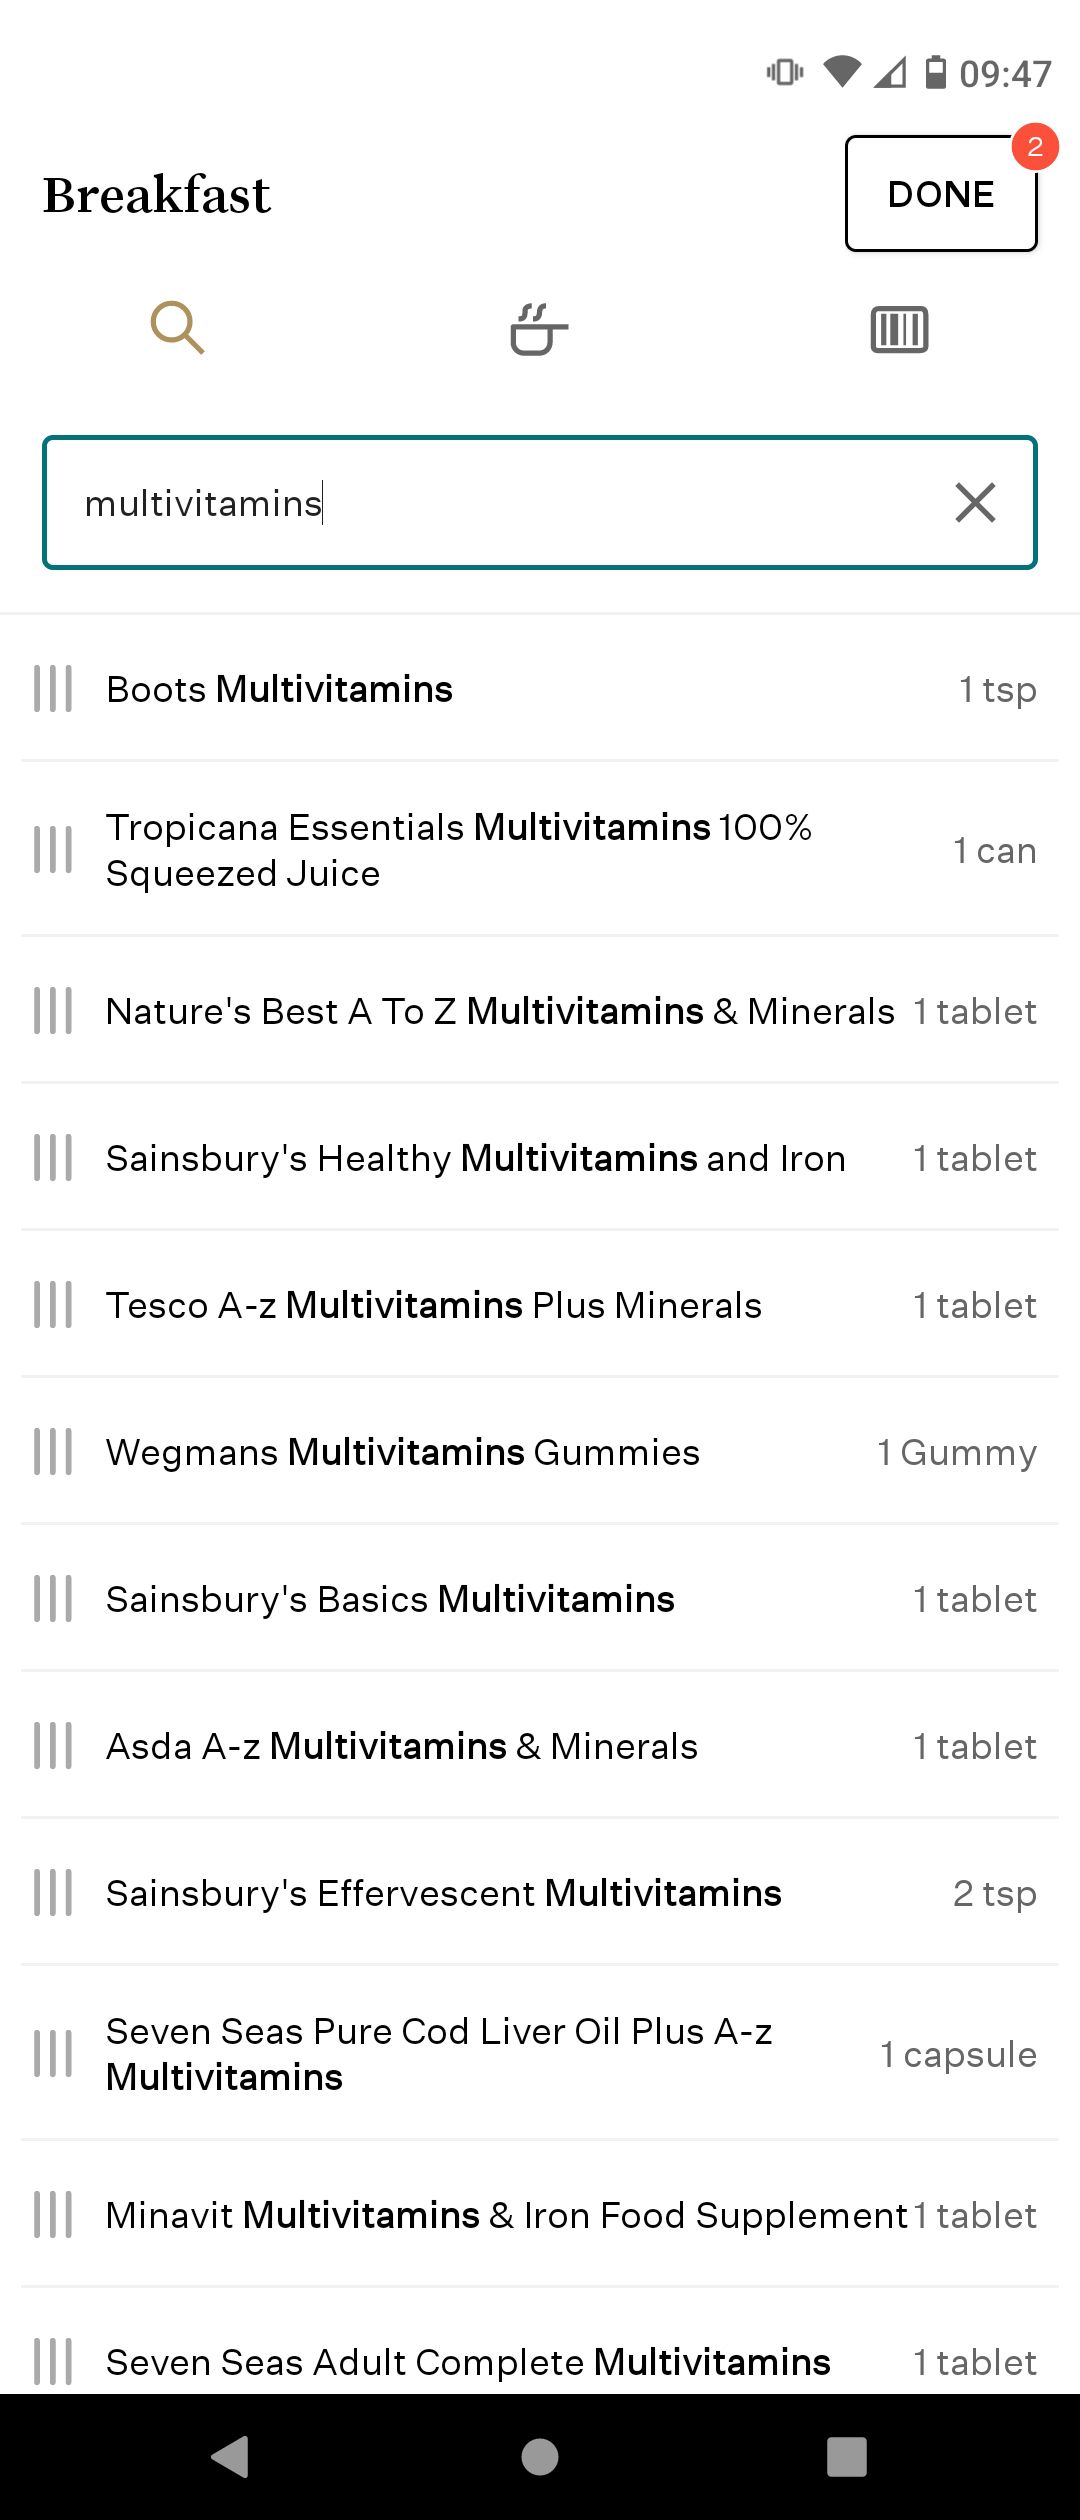 Adding Multivitamins to Noom's Meal Tracker